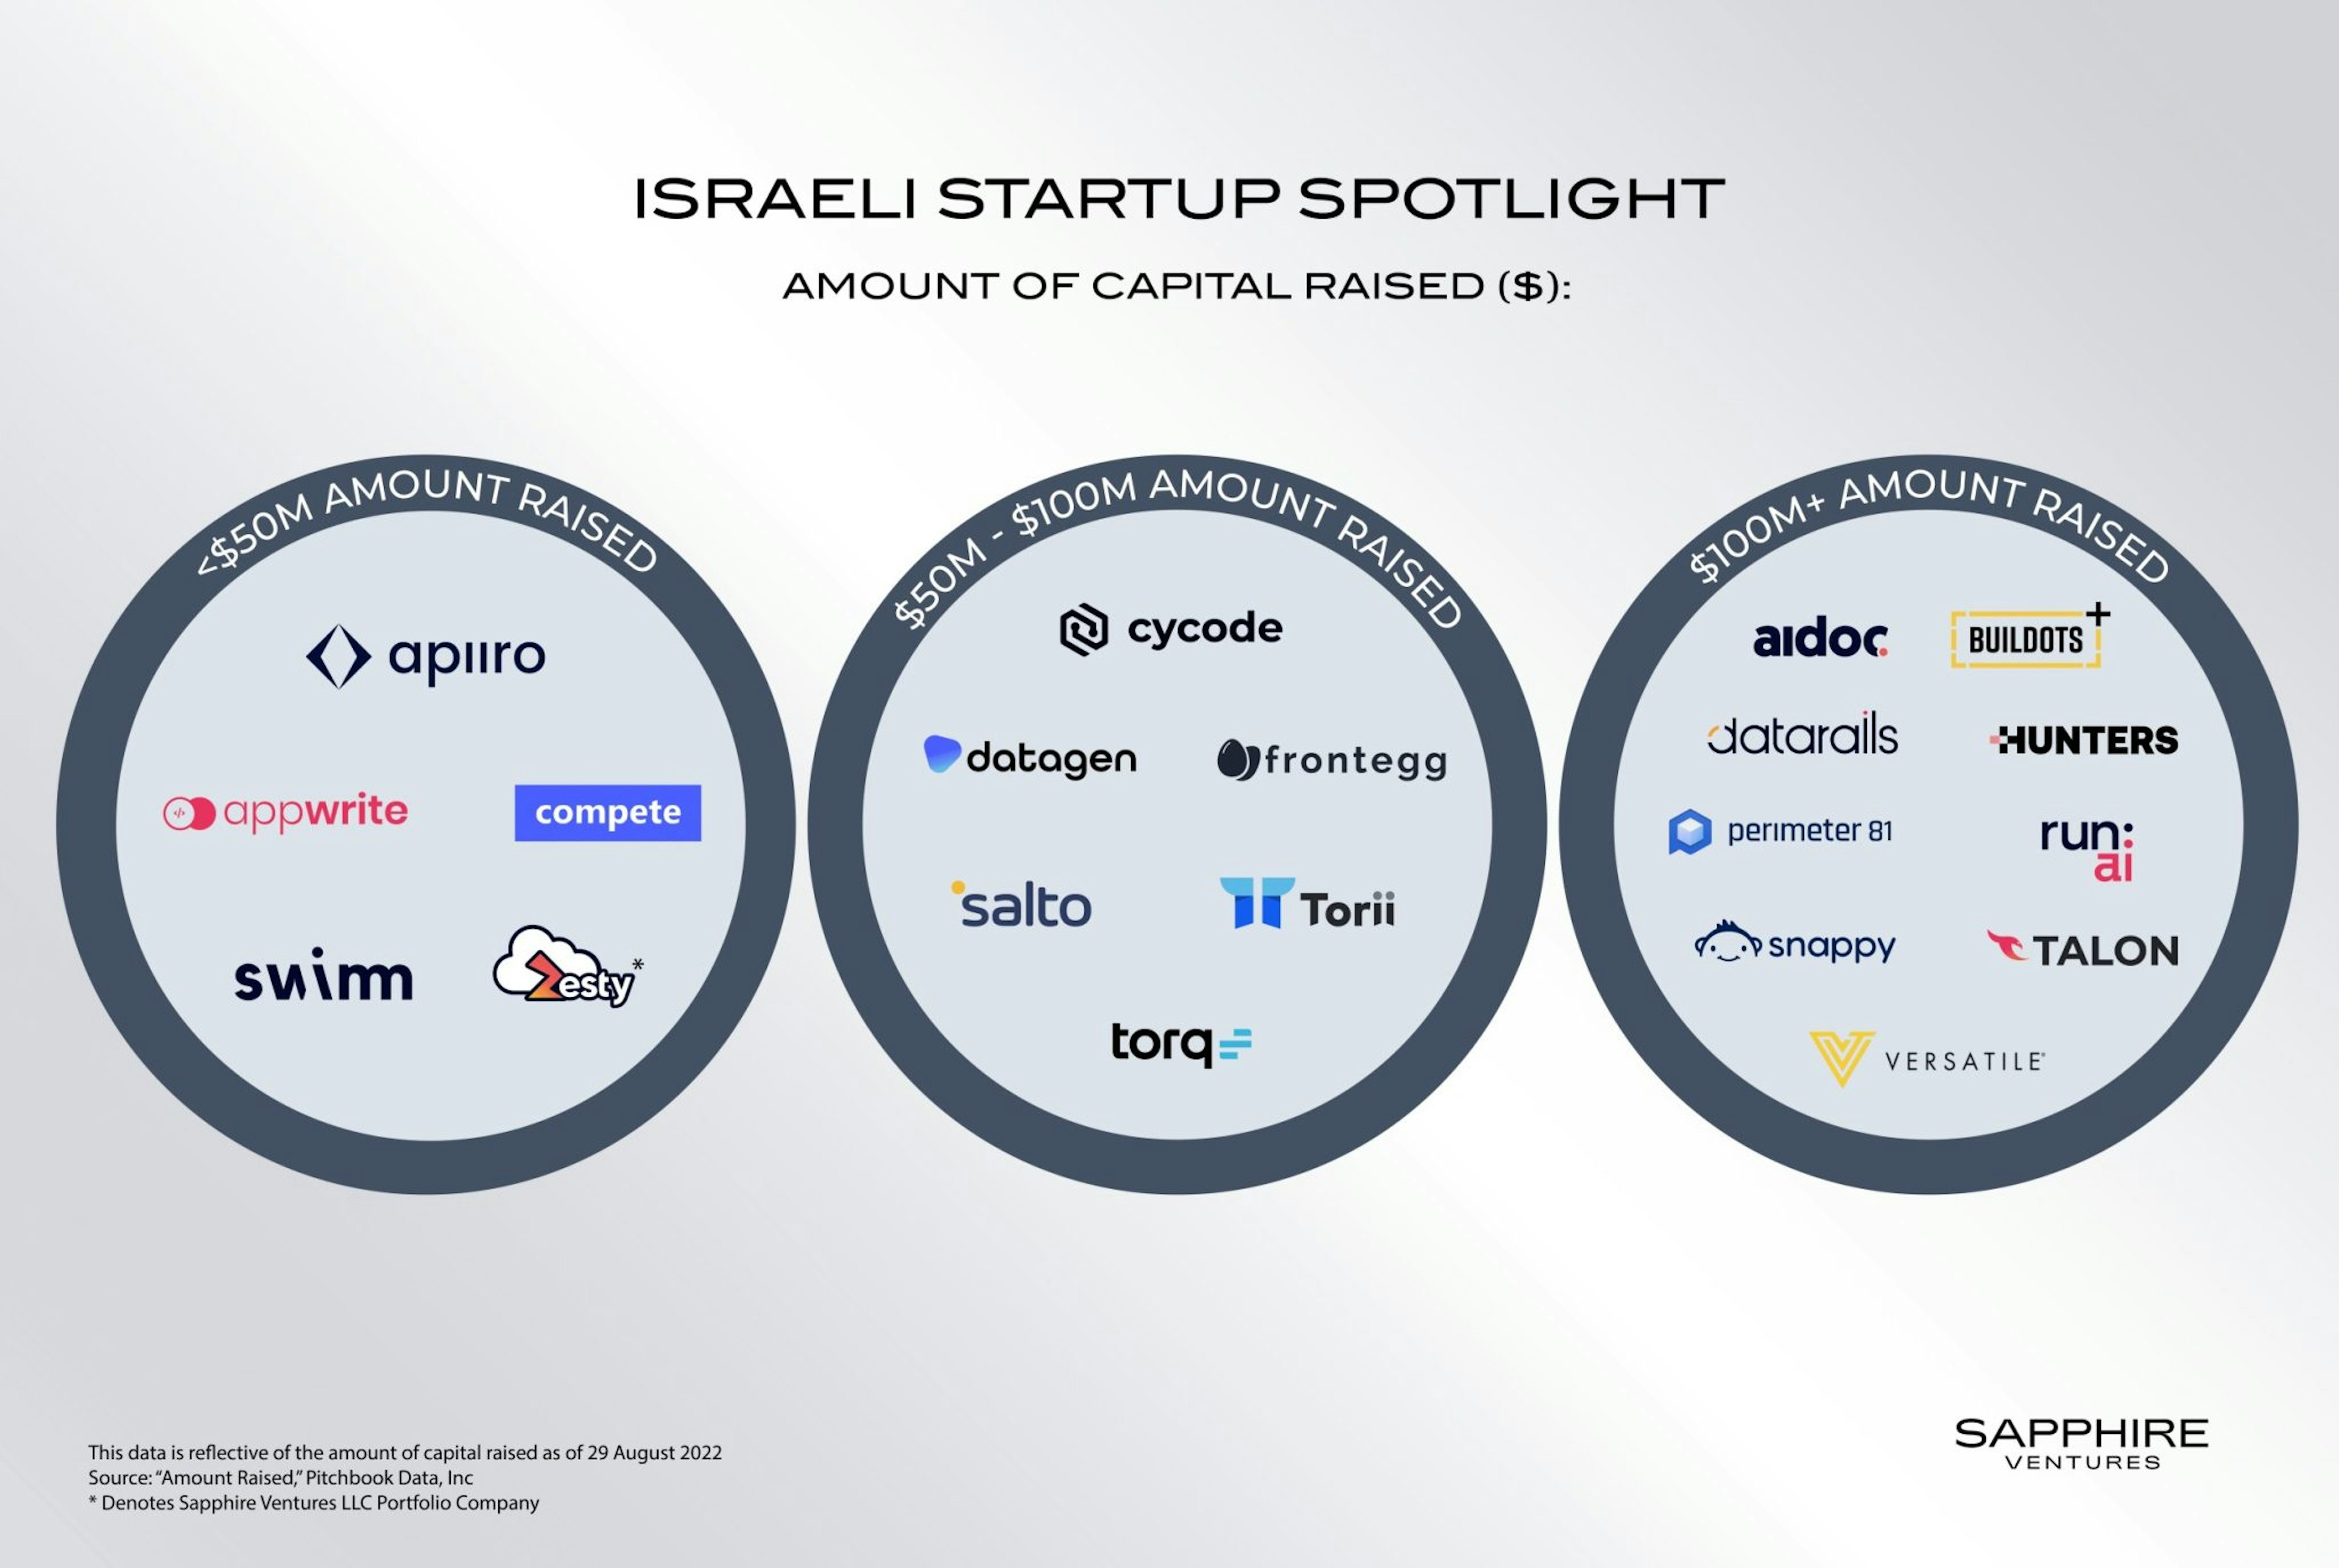 Learn the secrets of many Israeli startups. Just imagine what if